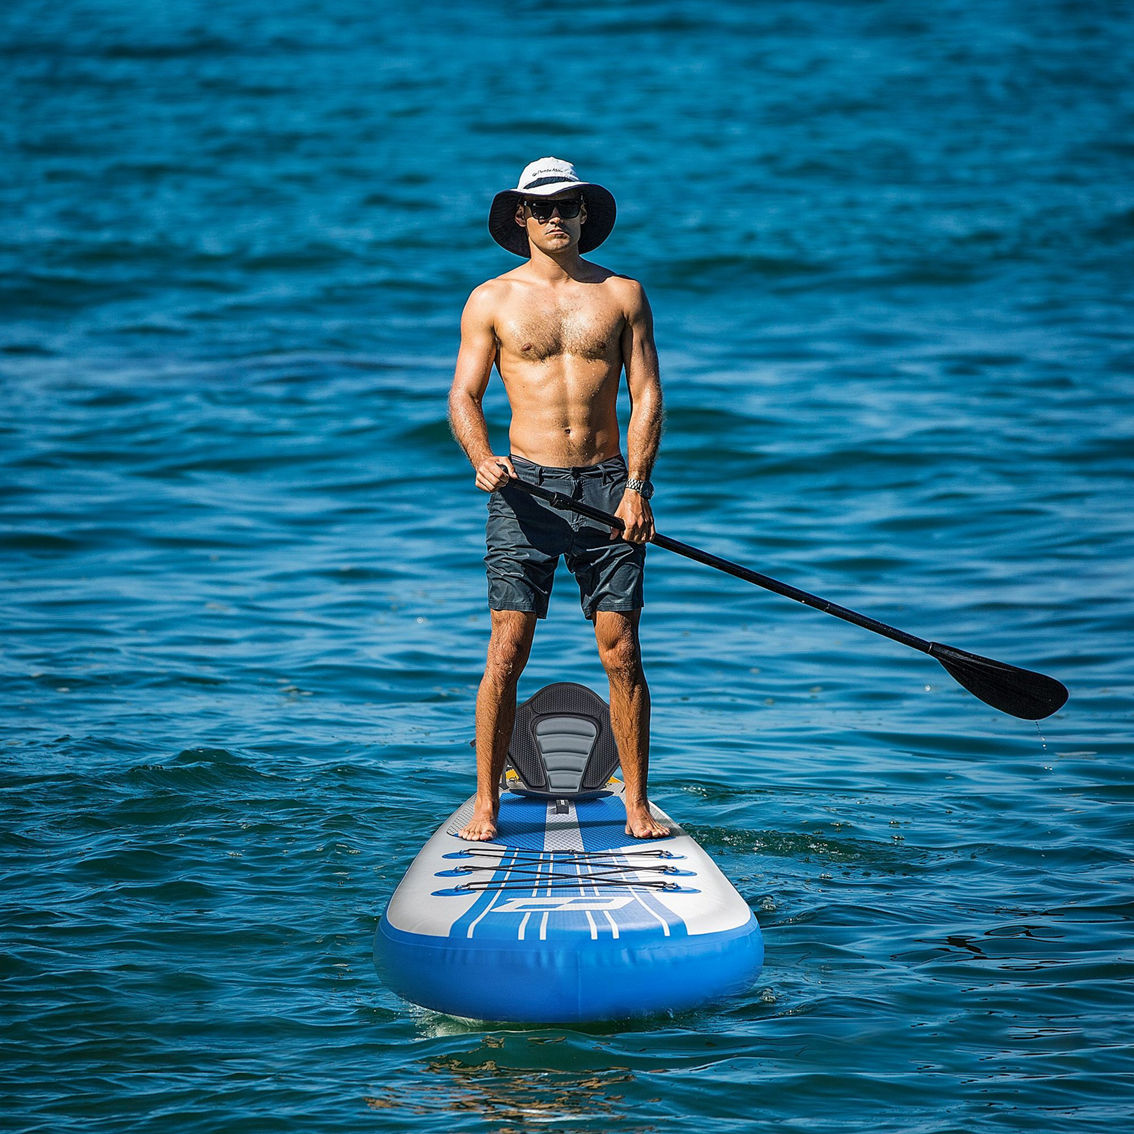 inQracer Inflatable Stand Up Paddle Board 11'x33''x6'', Blue - Image 3 of 5